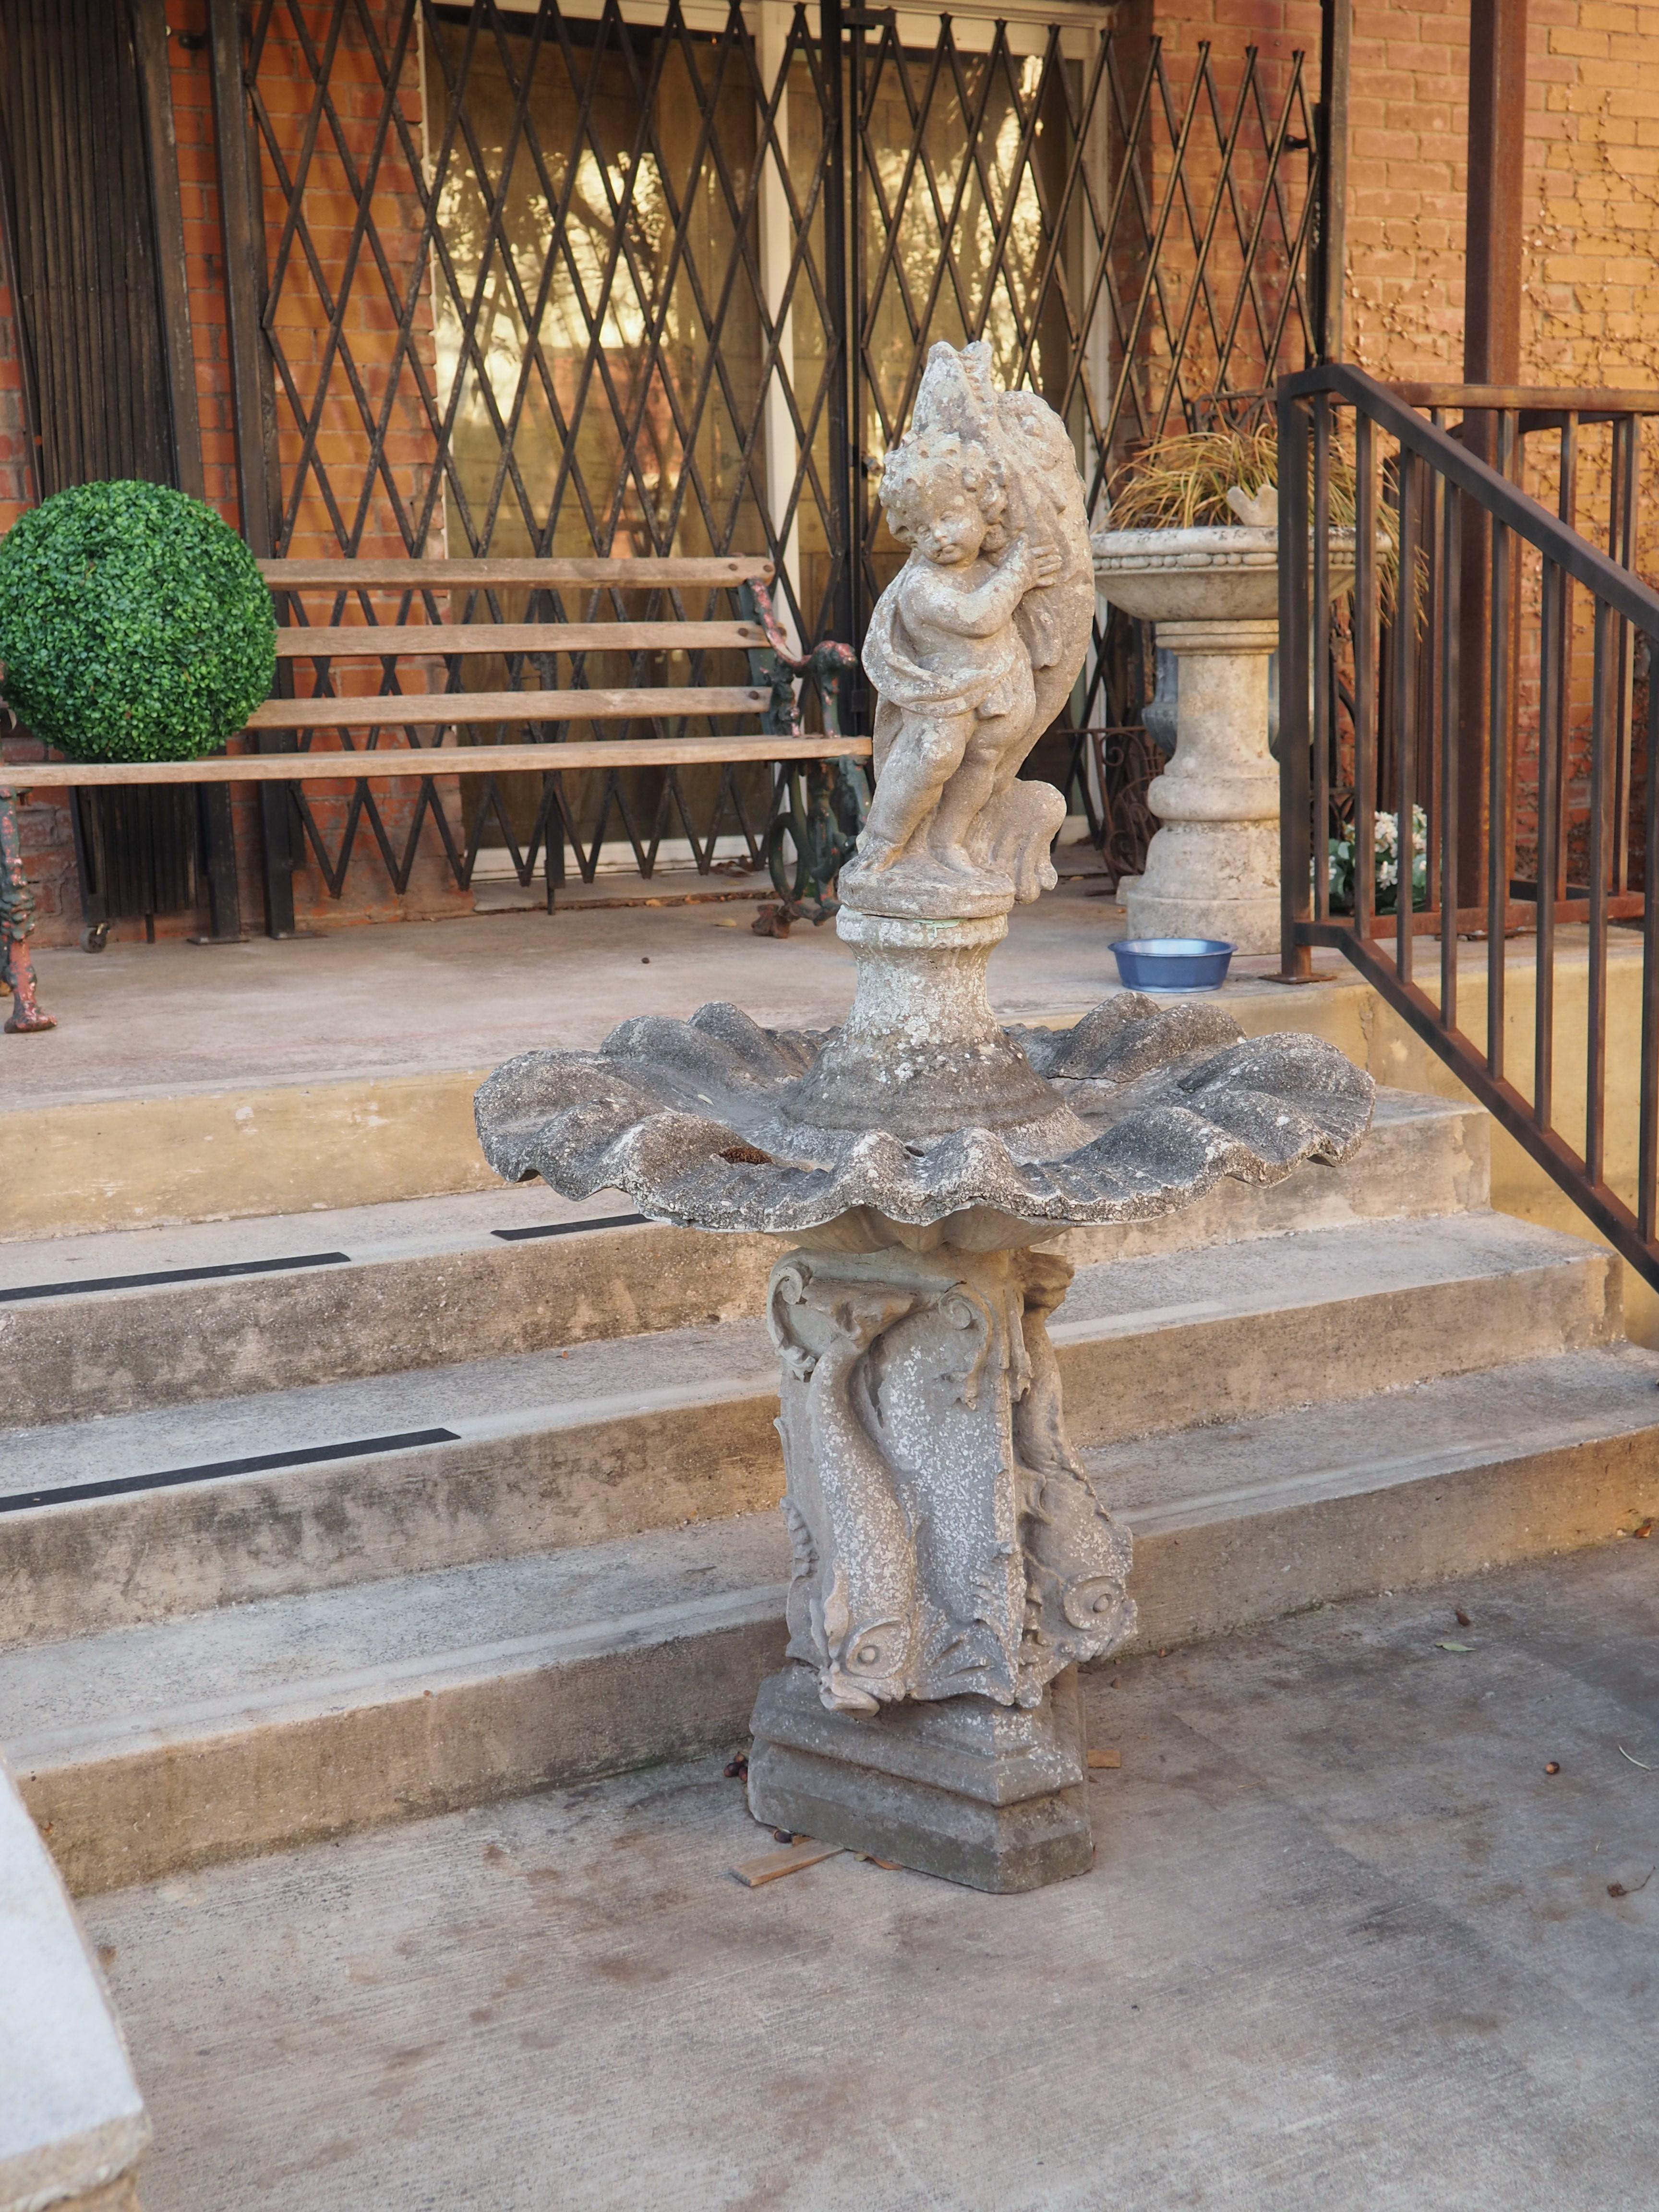 Made from reconstituted stone, or cast stone, which is a mixture of crushed stone and cement, this putto and dolphin center fountain element was cast in France, circa the 1950’s. Decades of exposure to the elements has resulted in a sought-after